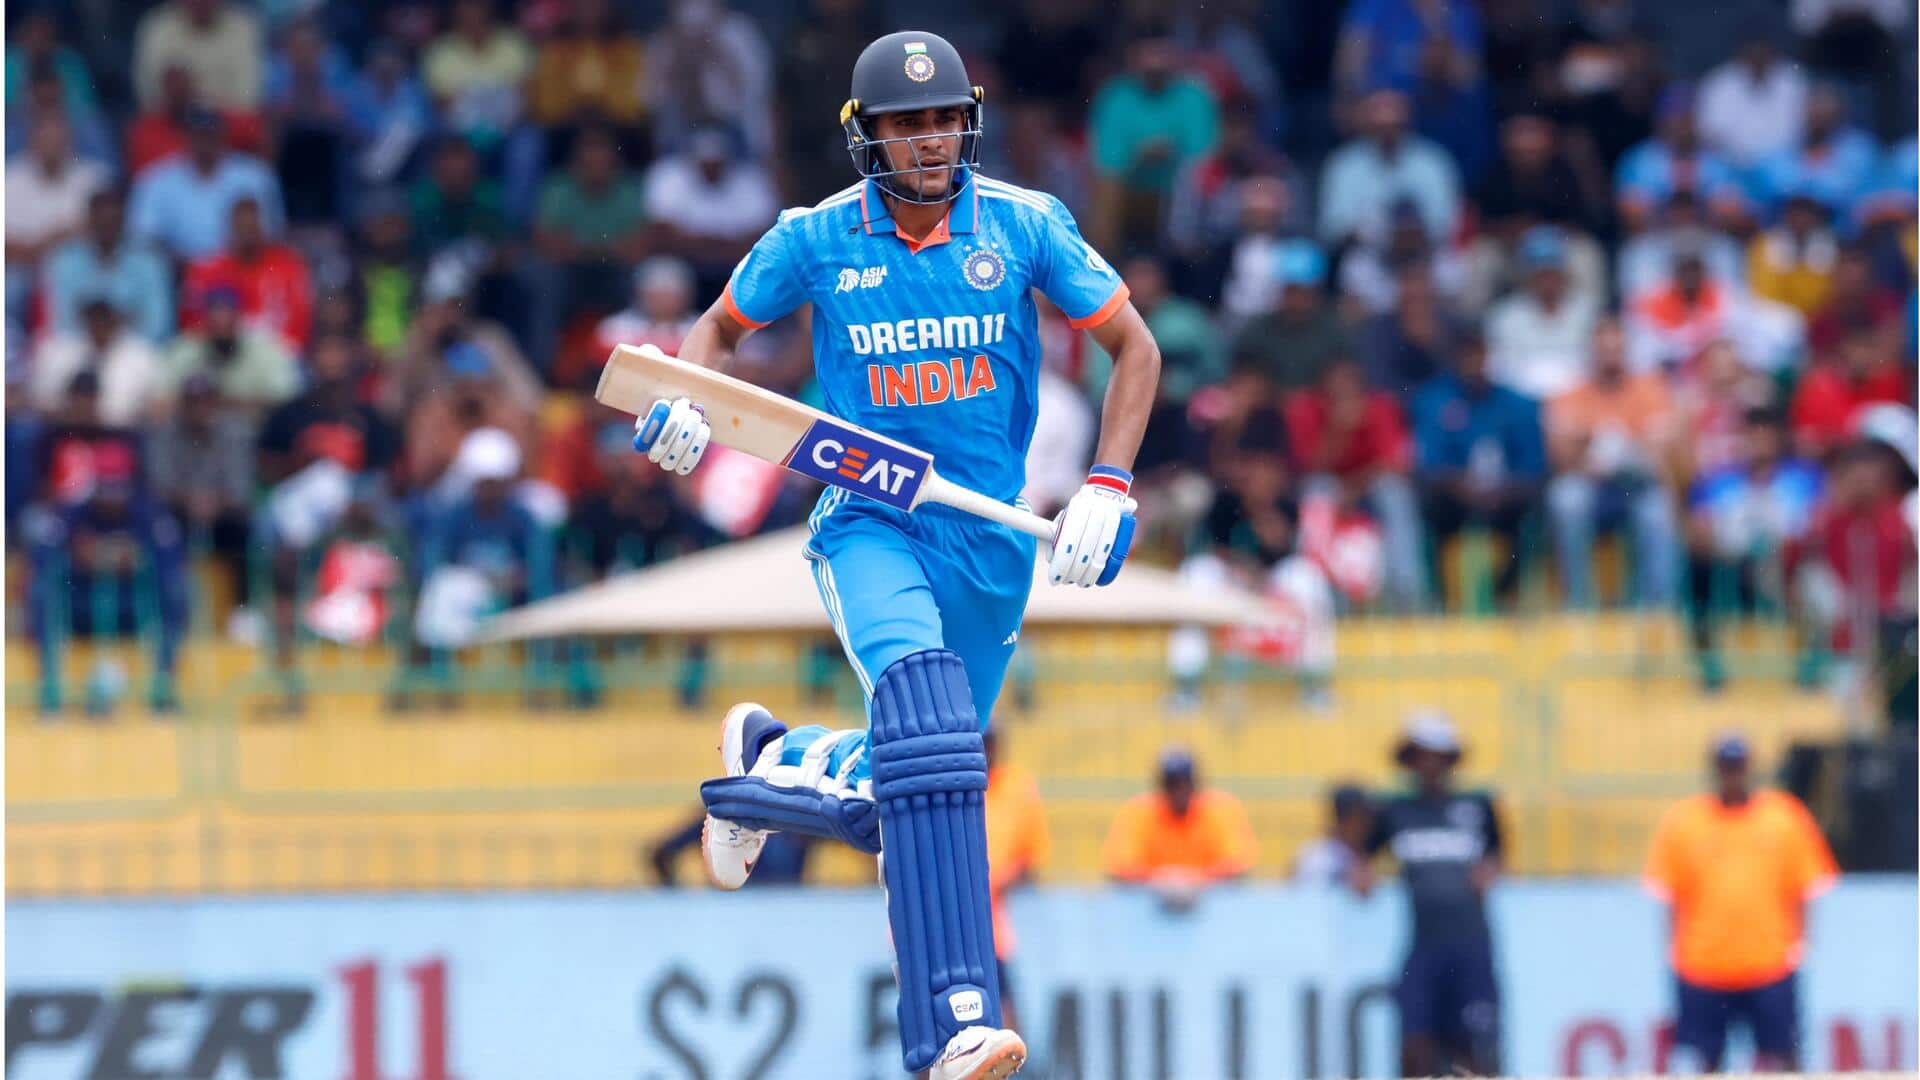 Shubman Gill becomes the fastest batter to 2,000 ODI runs